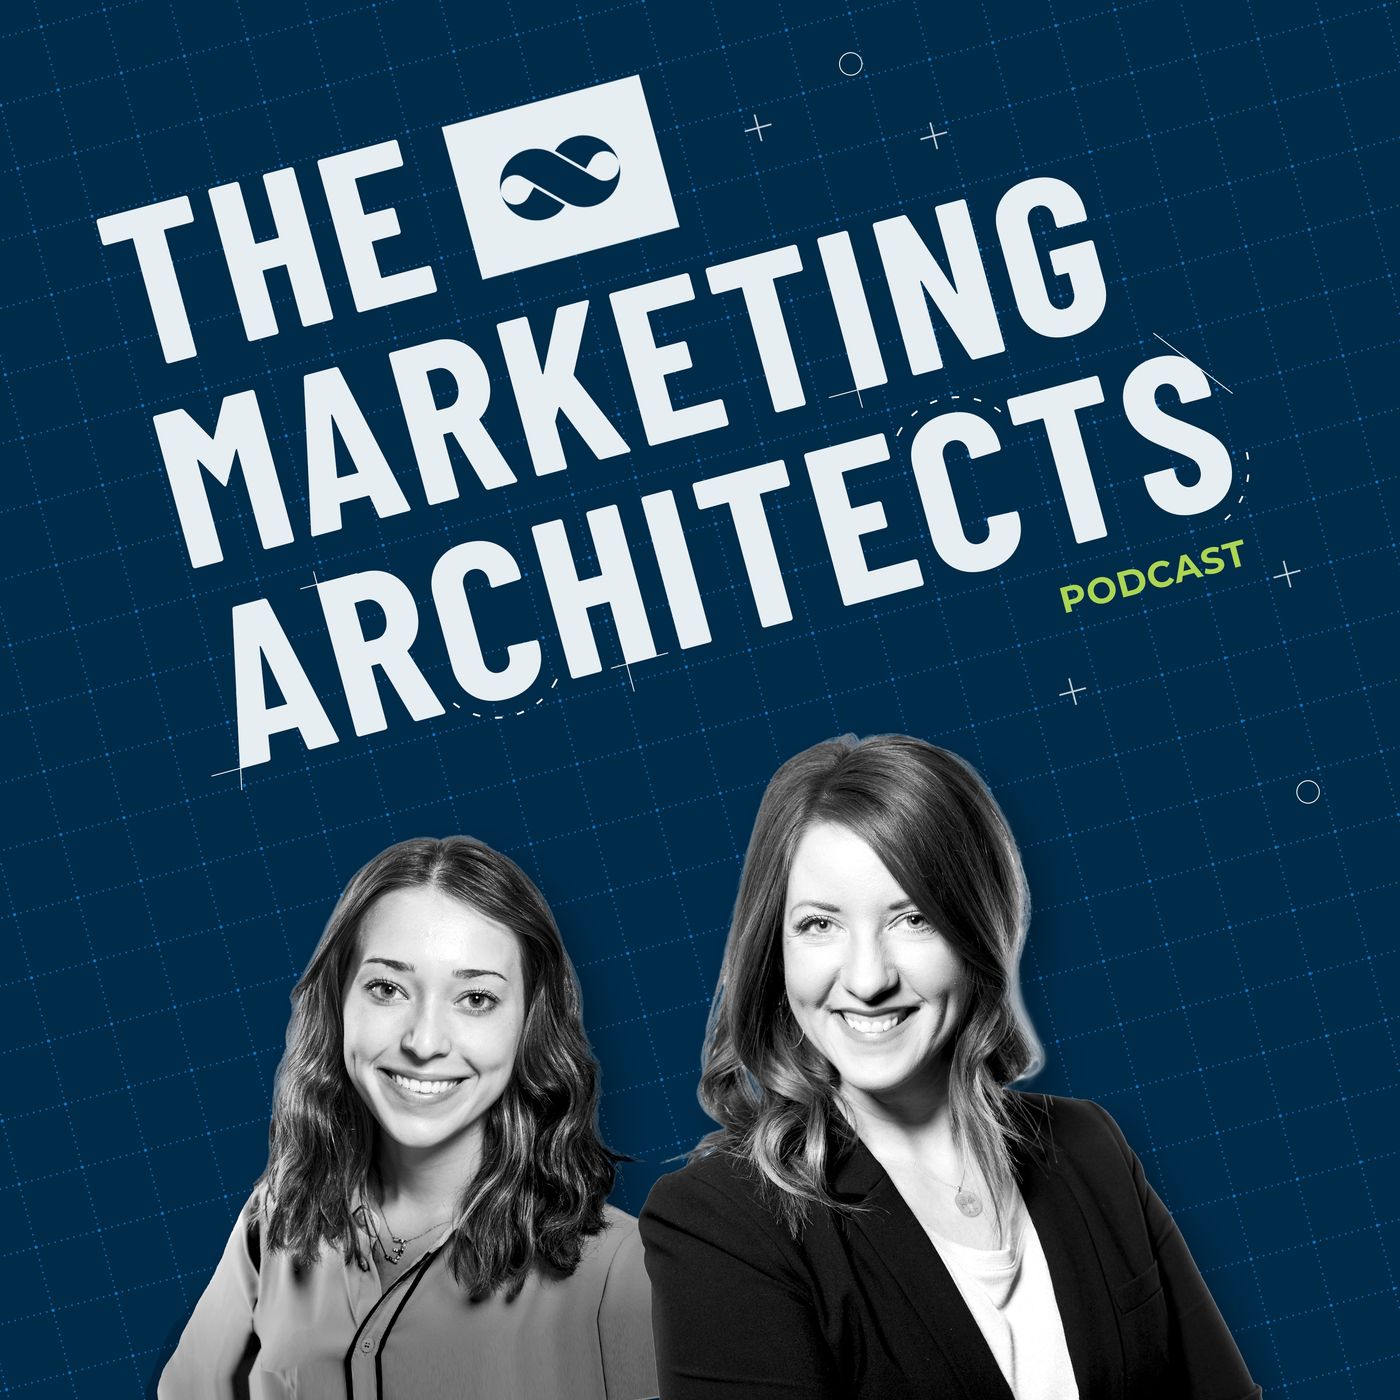 The Marketing Architects Podcast Trailer by Marketing Architects